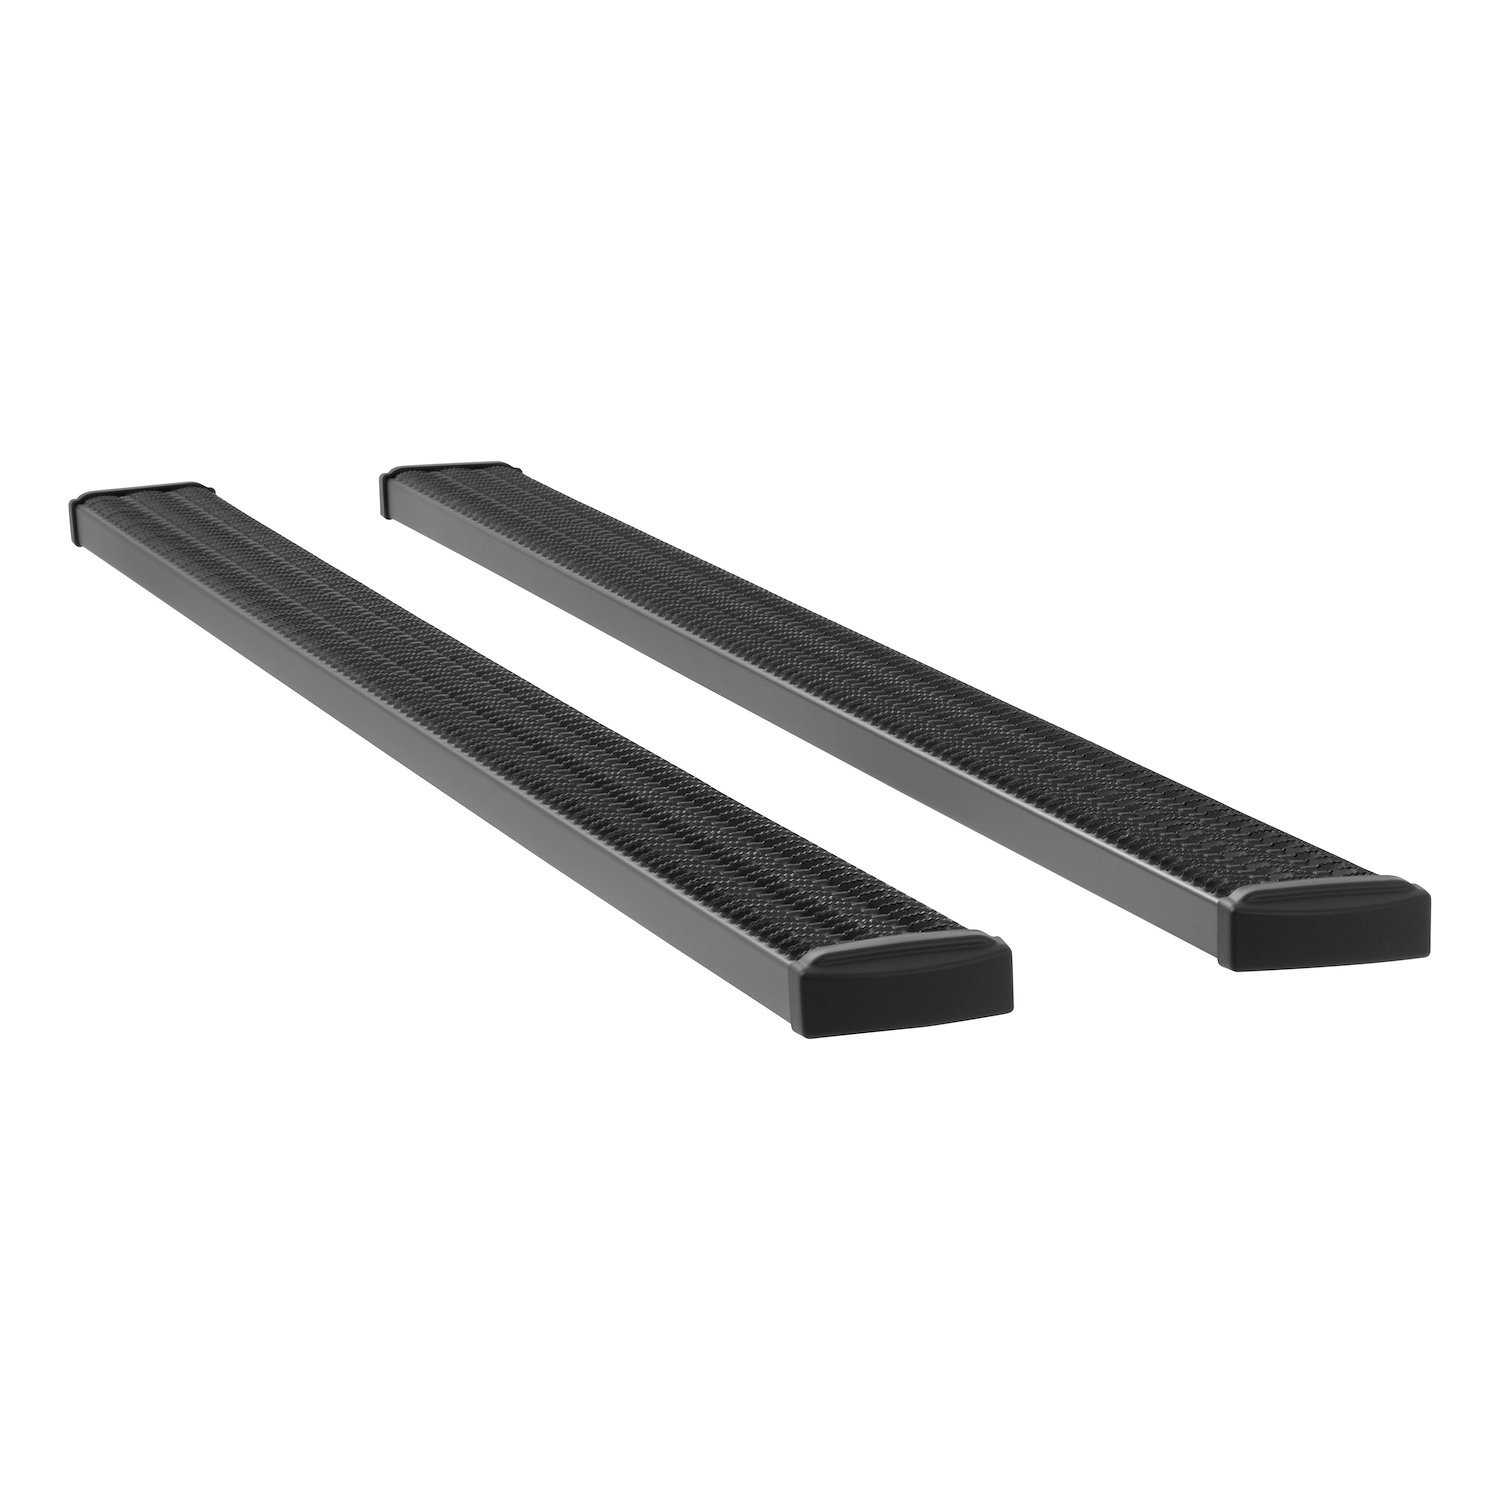 415125-401339 Grip Step 7 in. x 125 in. Aluminum Wheel-to-Wheel Running Boards Fits Select Ram 3500